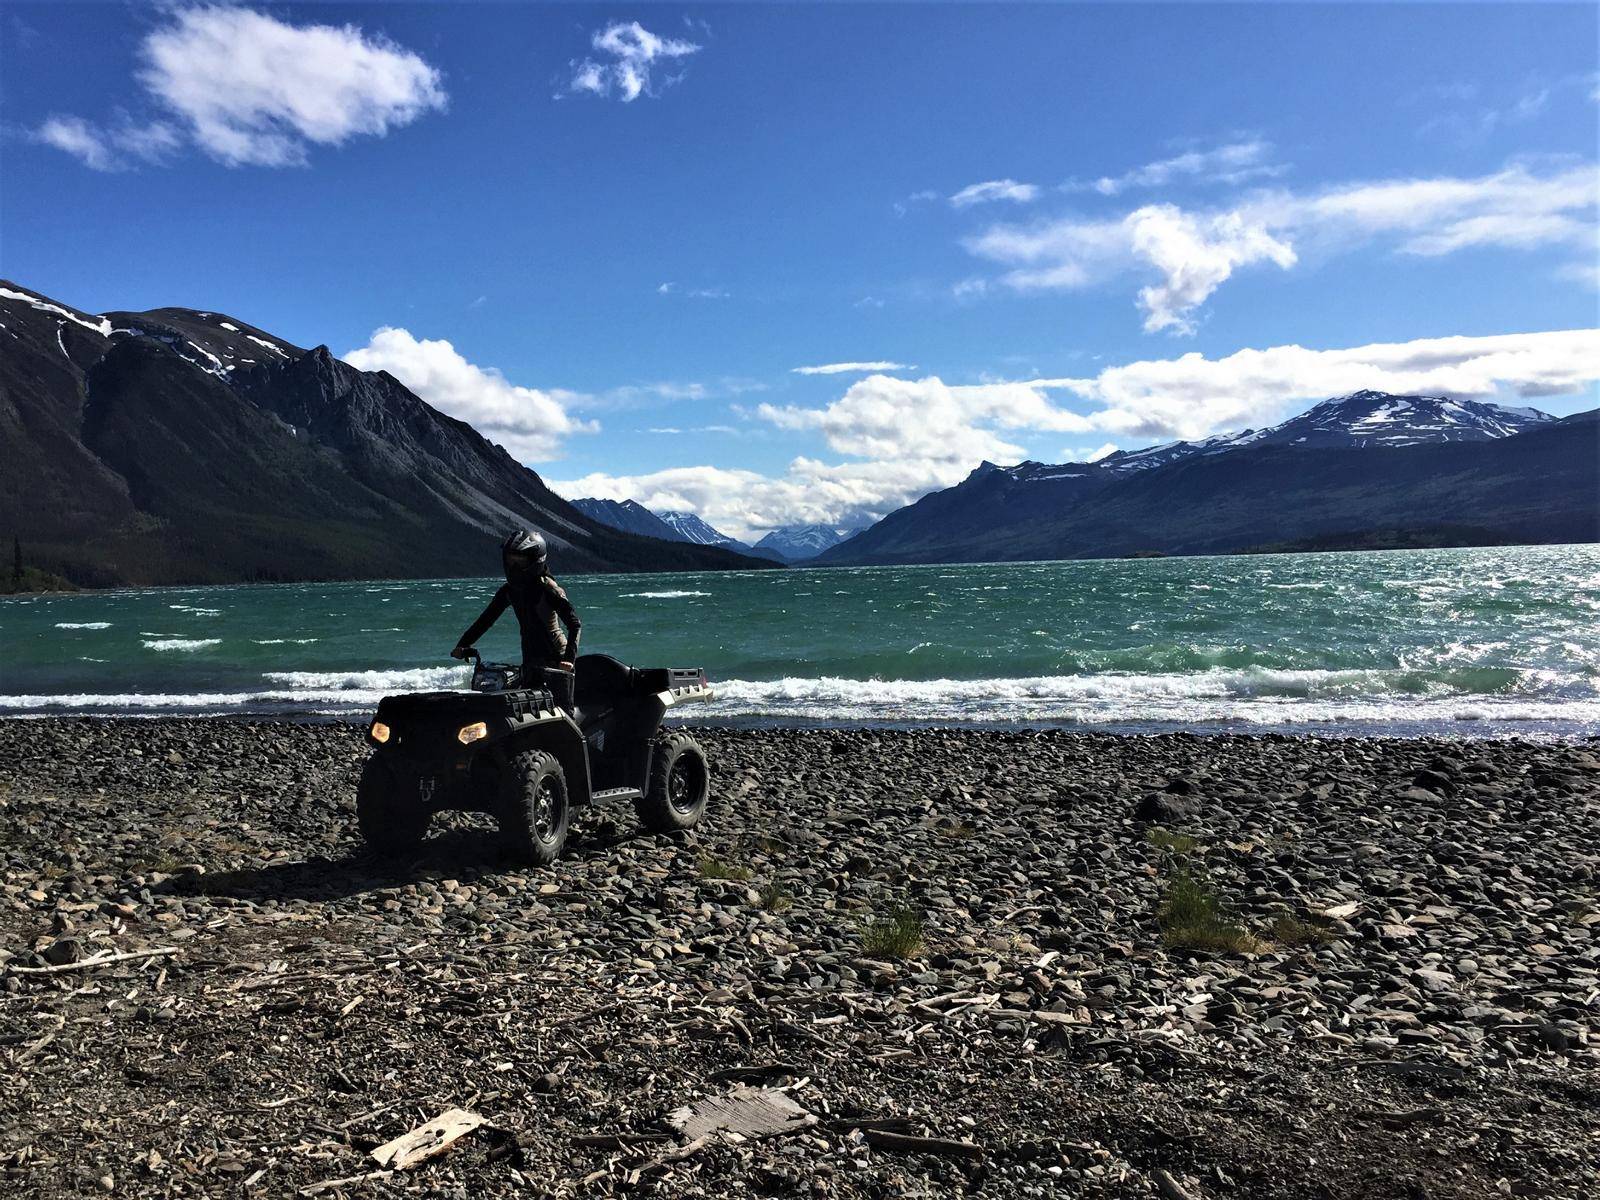 Person on ATV on shore of lake, mountains in back